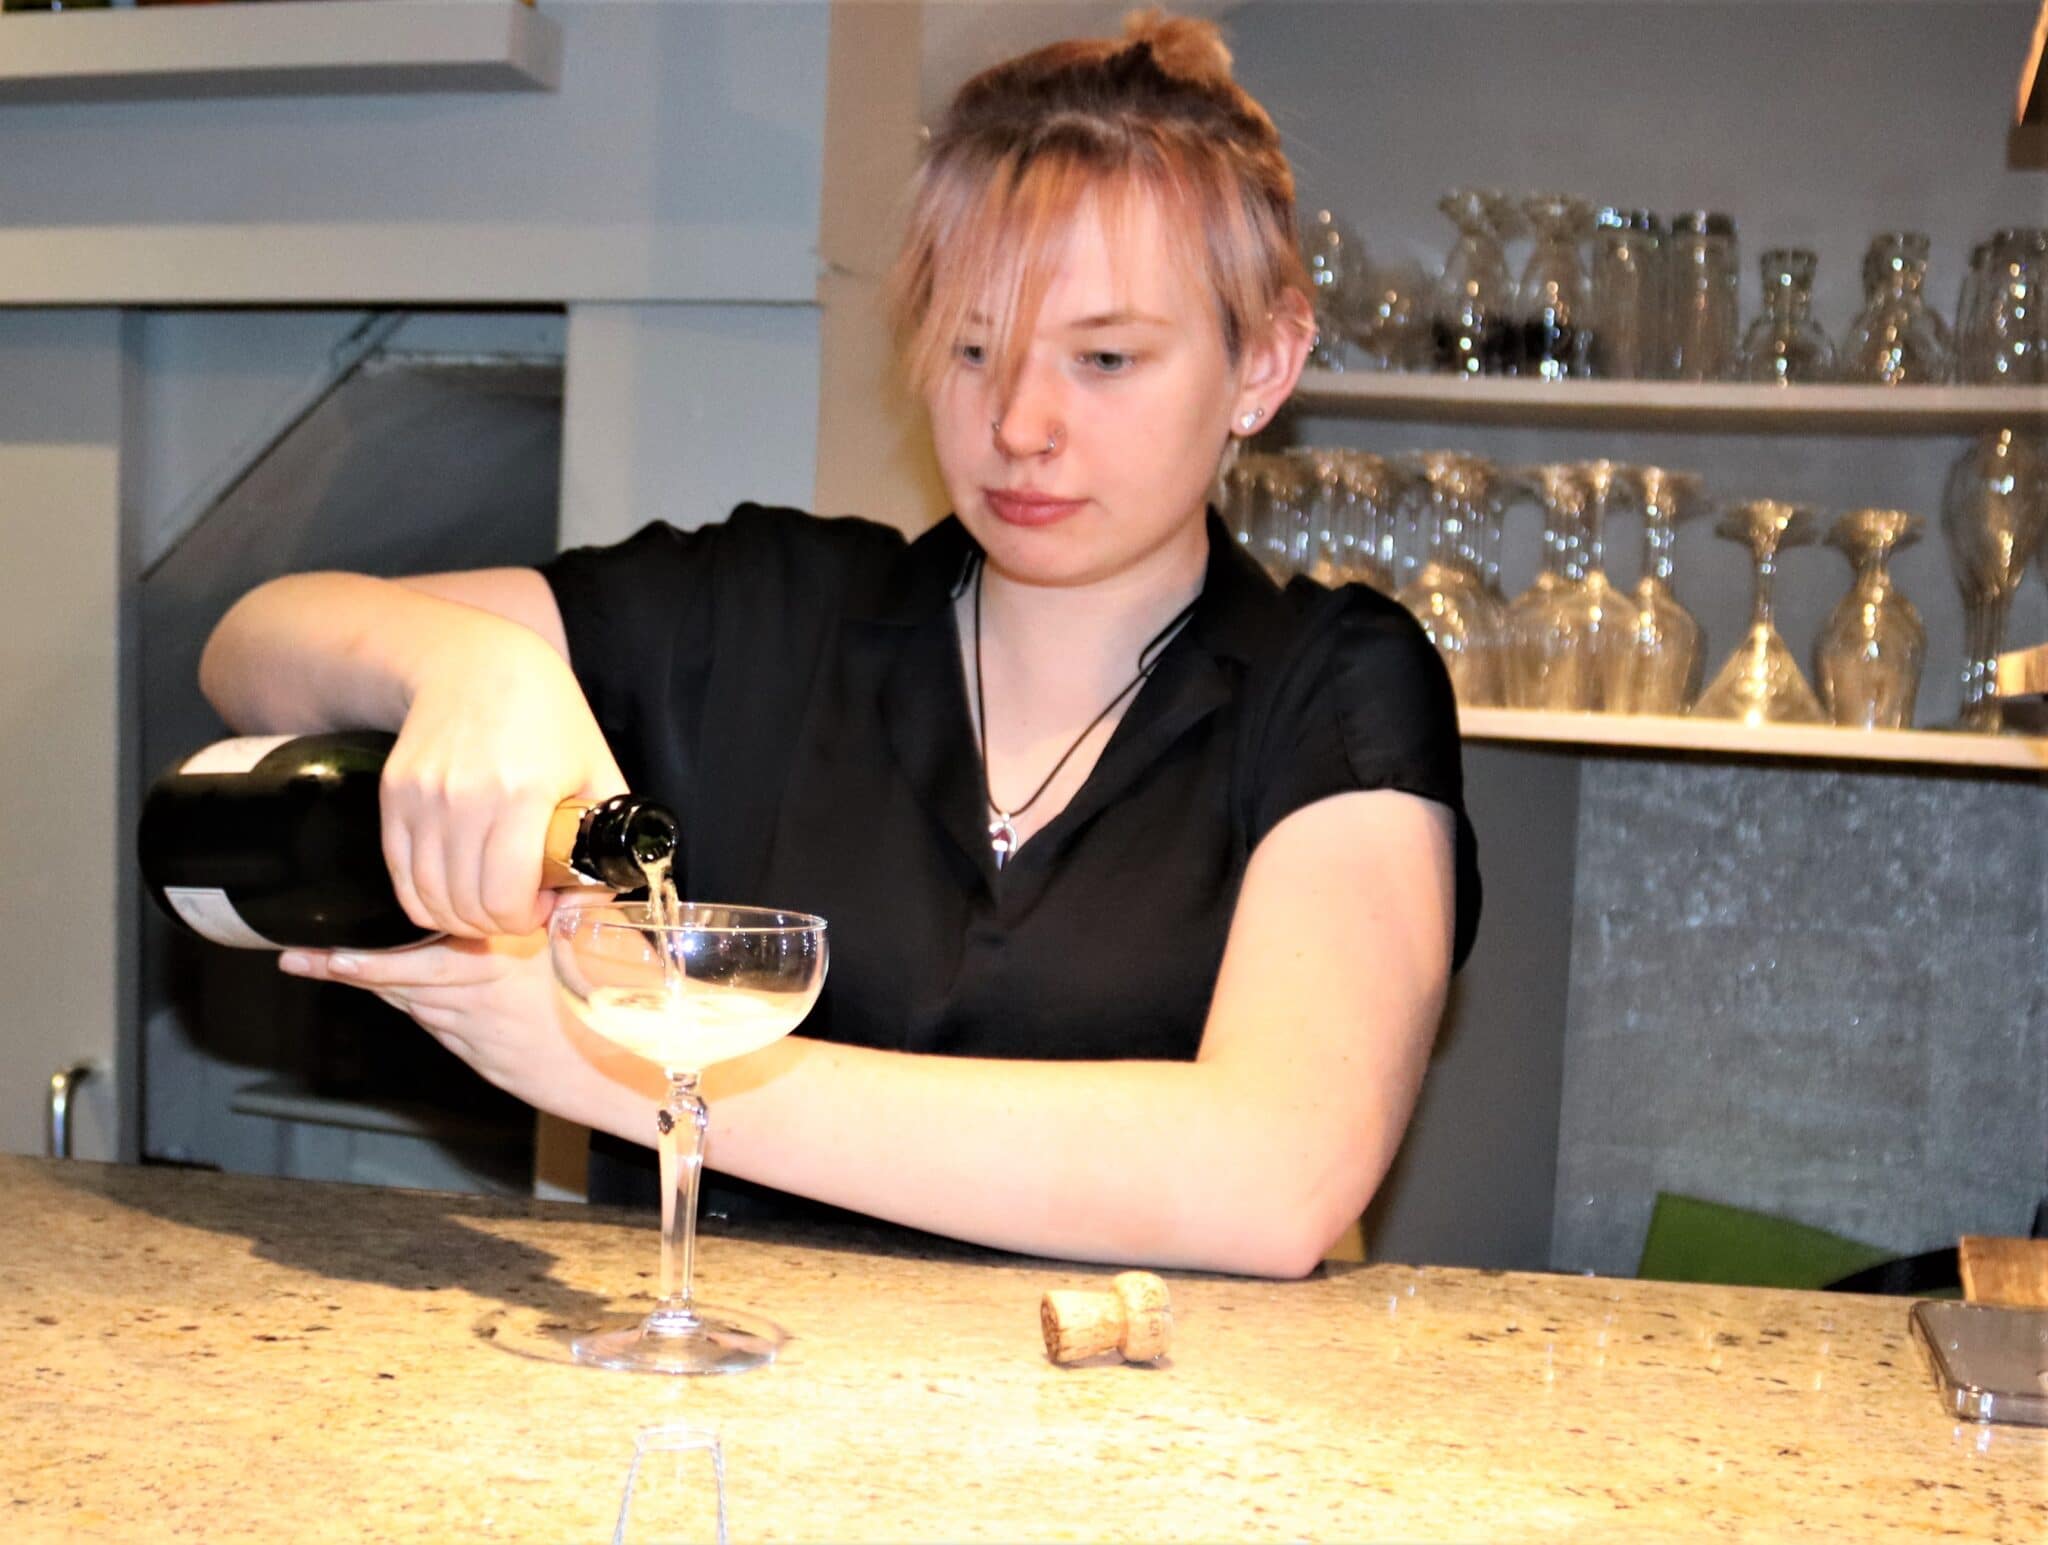 Aimie at work pouring cocktails for catering apprenticeship